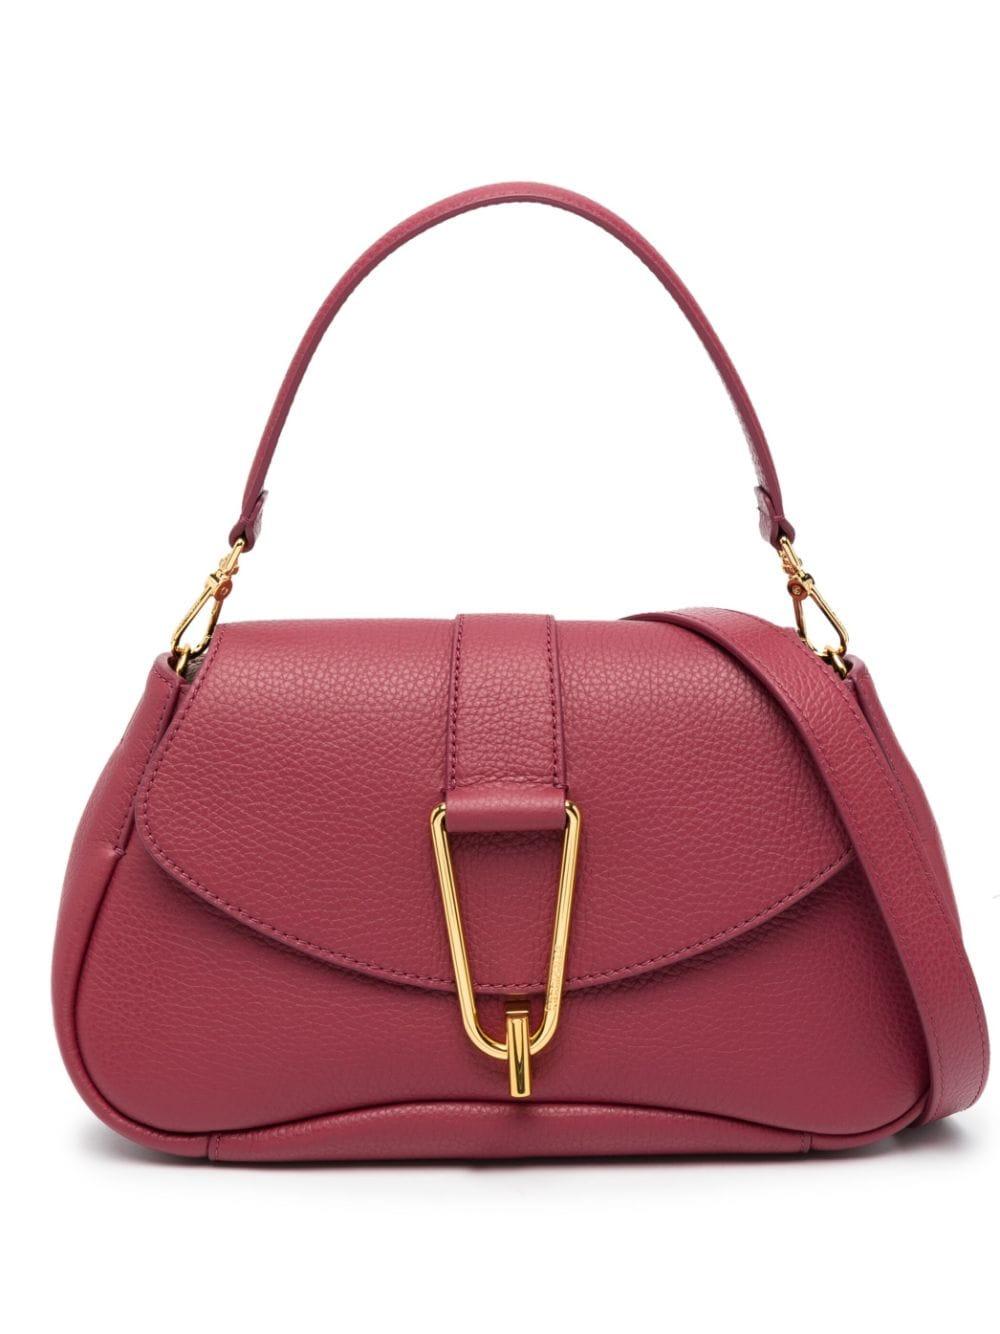 Coccinelle Himma Leather Crossbody Bag in Red | Lyst Australia